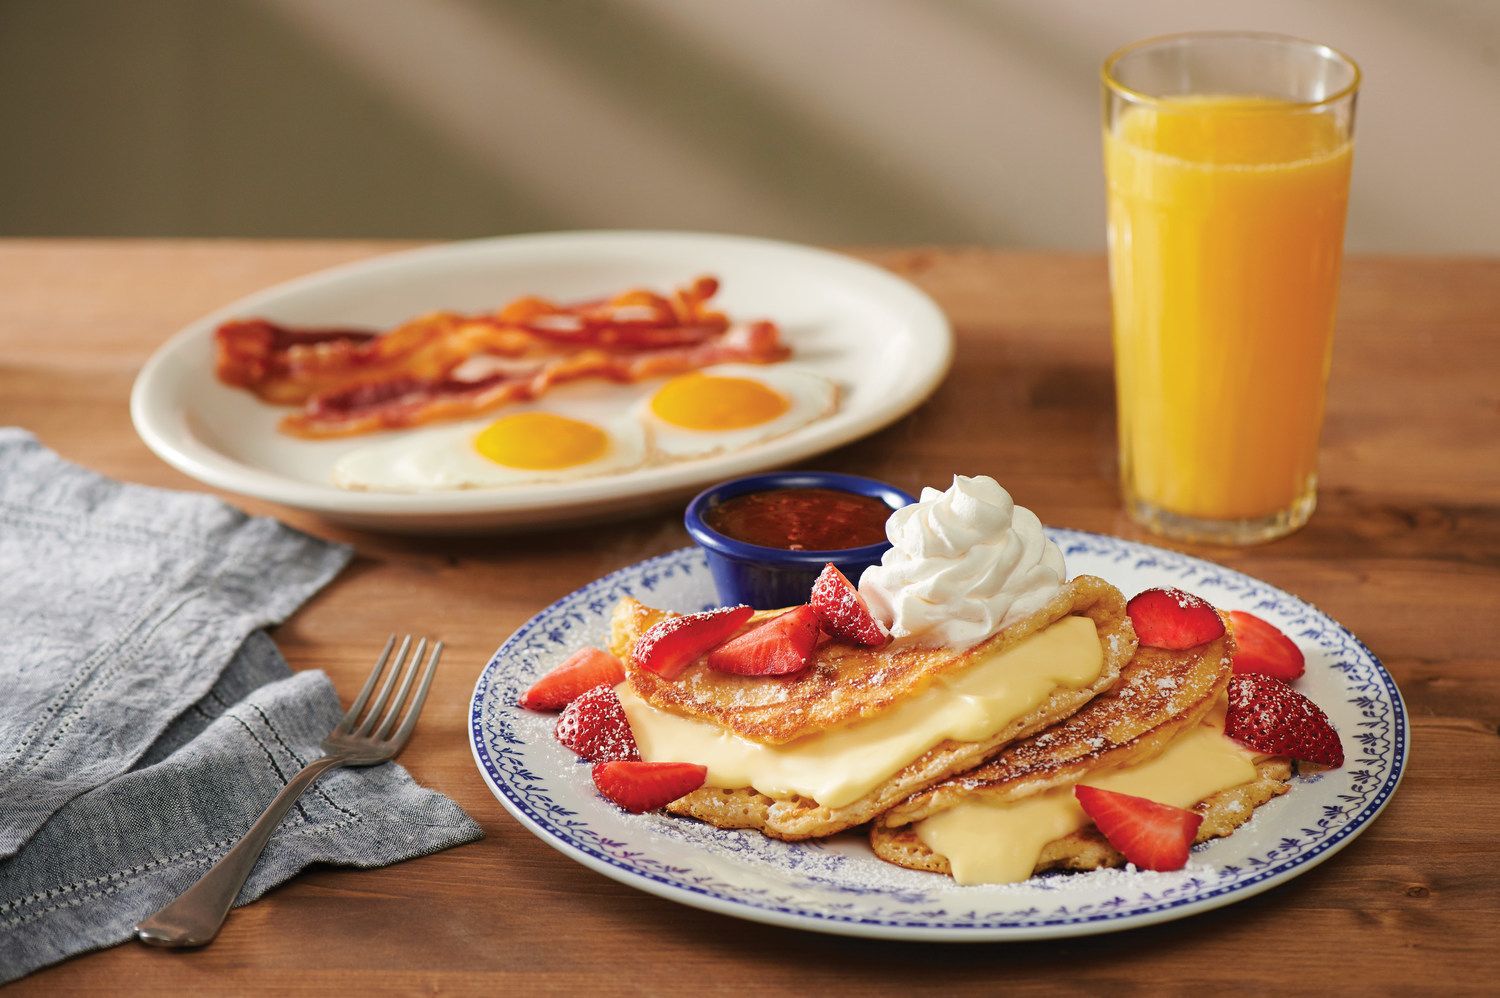 Cracker Barrel Old Country Store Upgrades All-Day, Homestyle Breakfast Offerings with New Menu Format, Selections